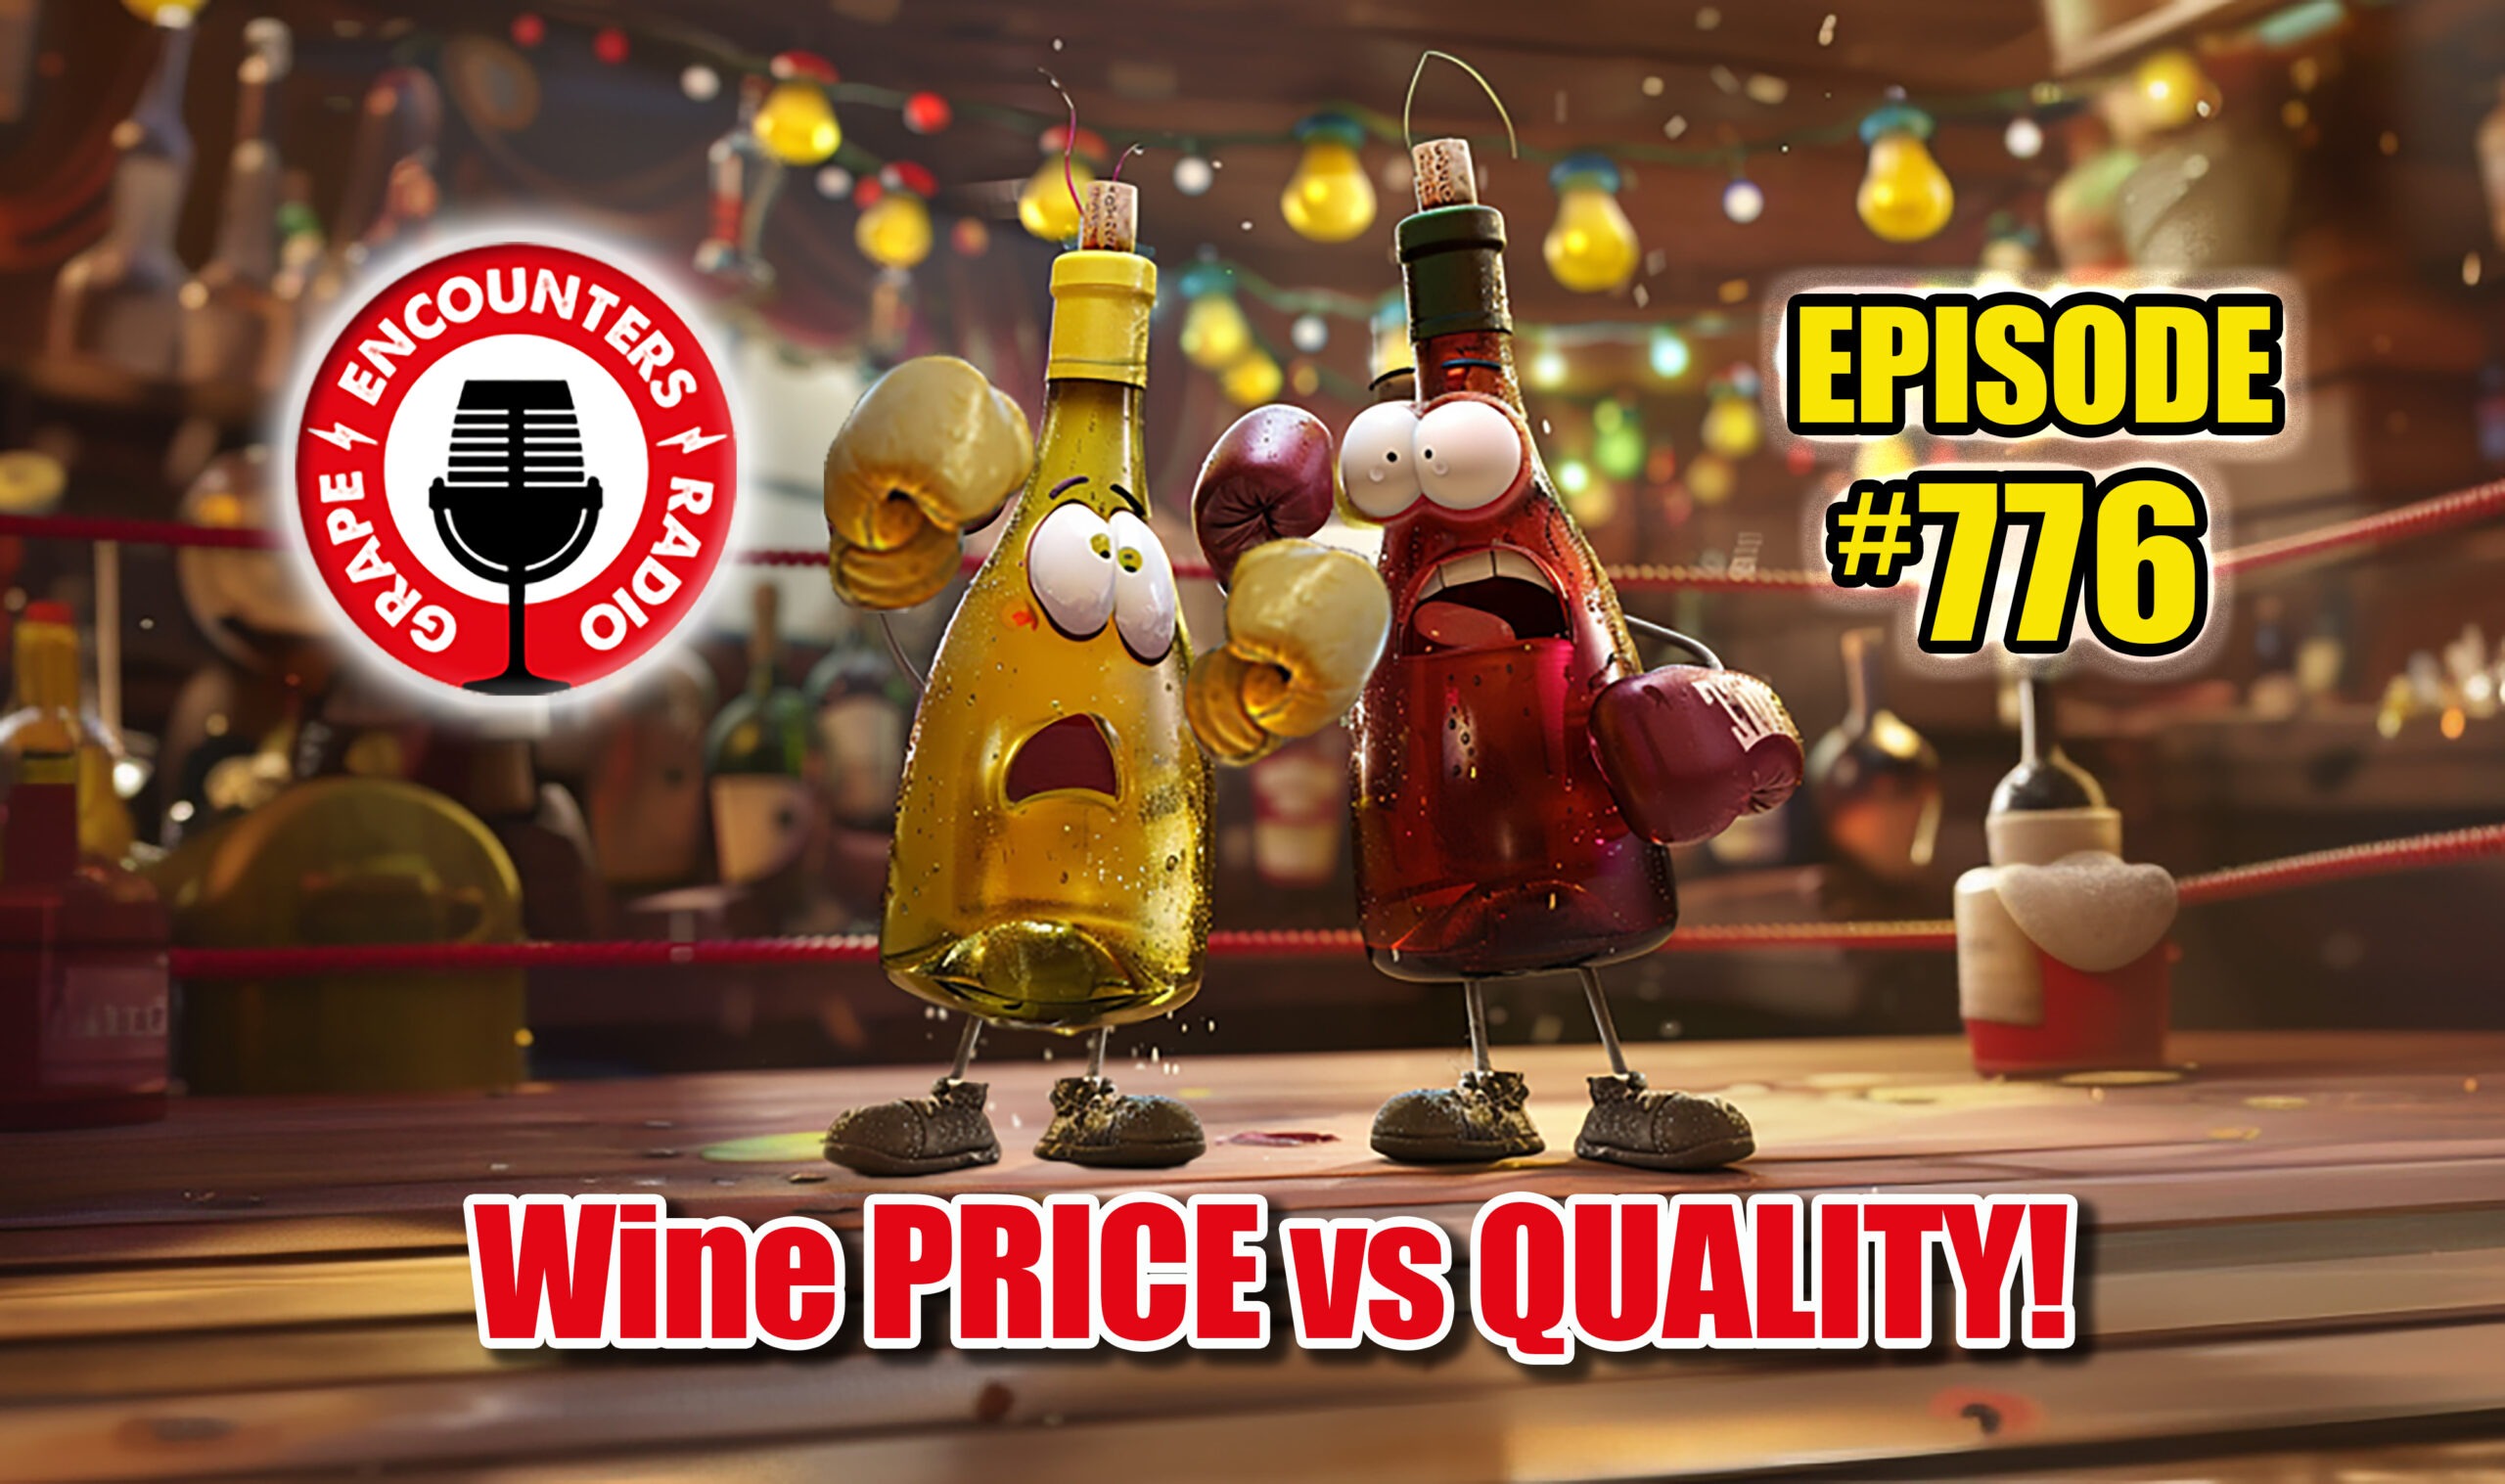 Episode #776 – Huge Head Scratcher!  Decoding the Absurd Relationship Between Wine Price and Quality!